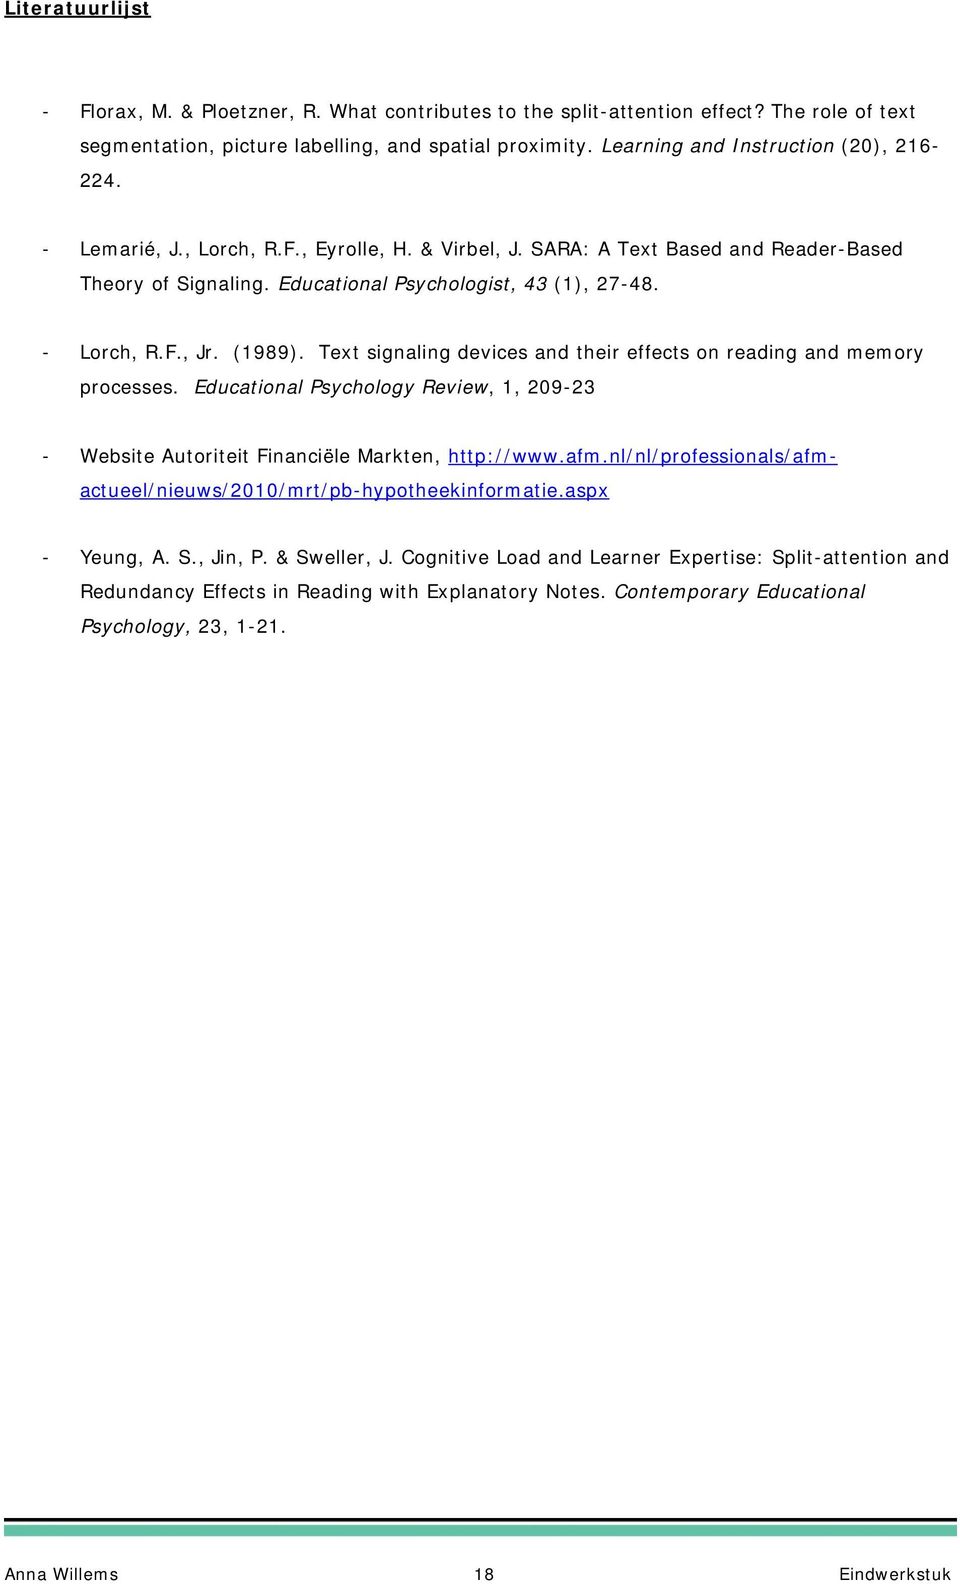 - Lorch, R.F., Jr. (1989). Text signaling devices and their effects on reading and memory processes. Educational Psychology Review, 1, 209-23 - Website Autoriteit Financiële Markten, http://www.afm.